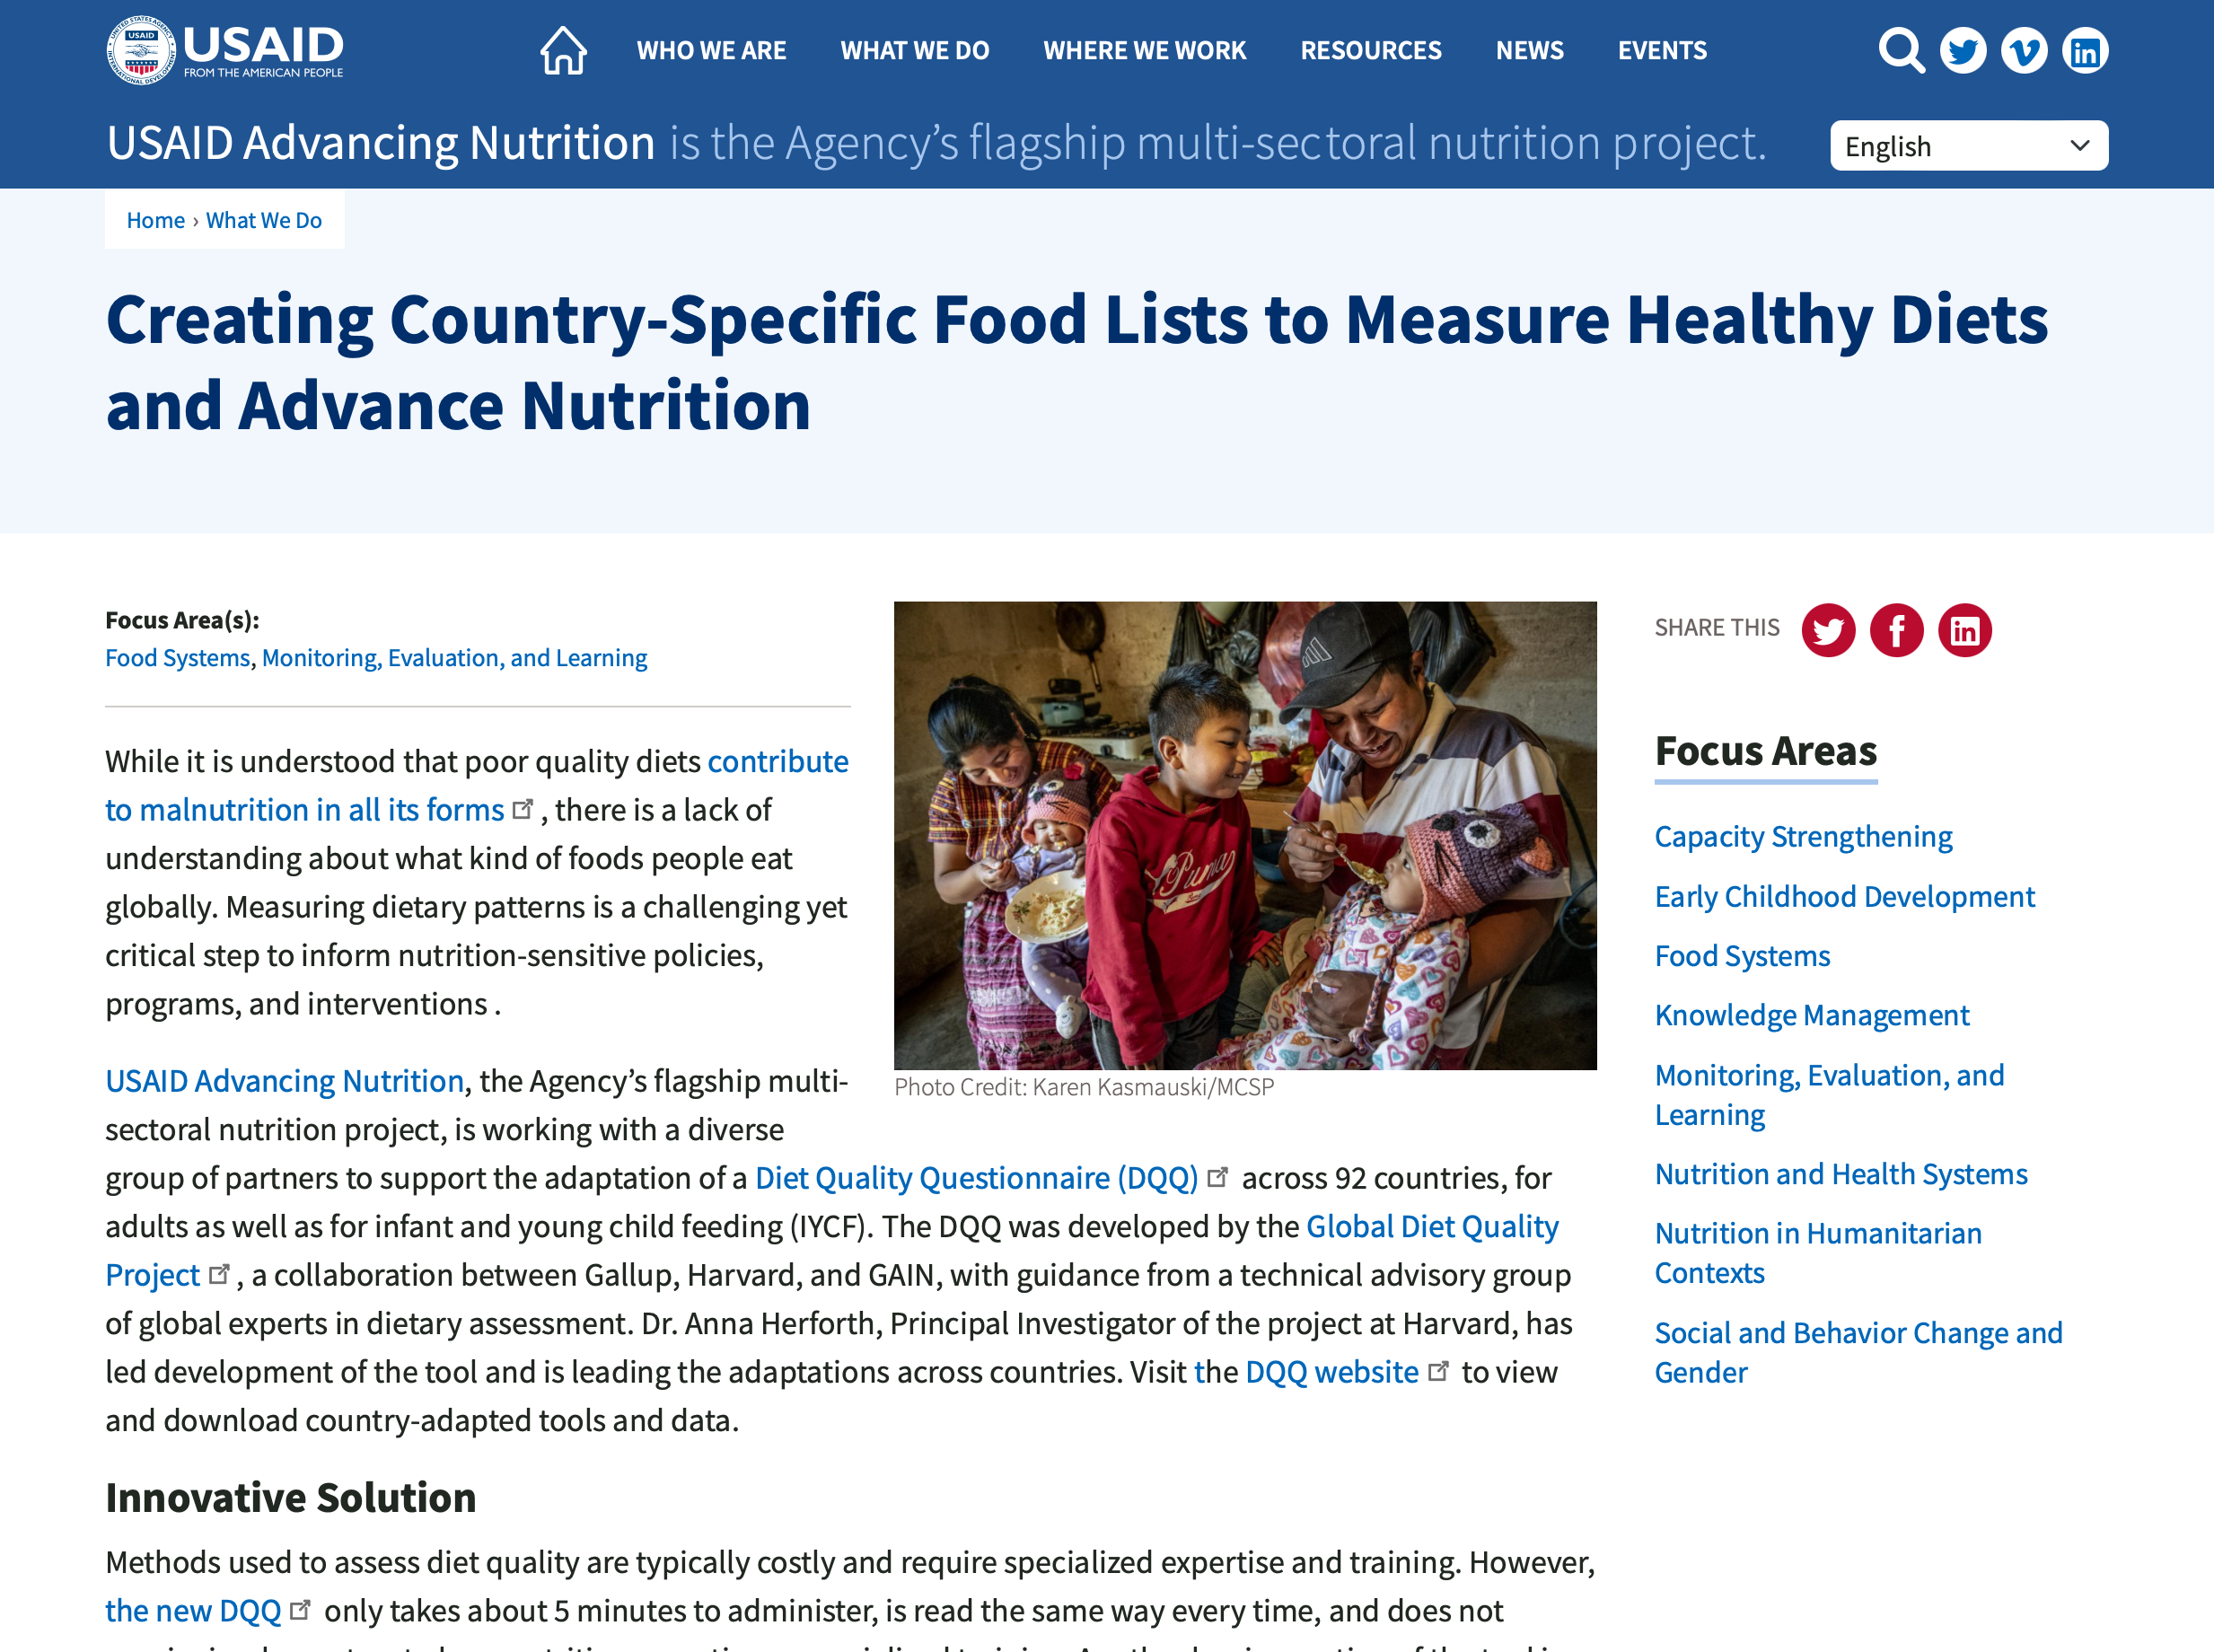 Creating Country-Specific Food Lists to Measure Healthy Diets and Advance Nutrition